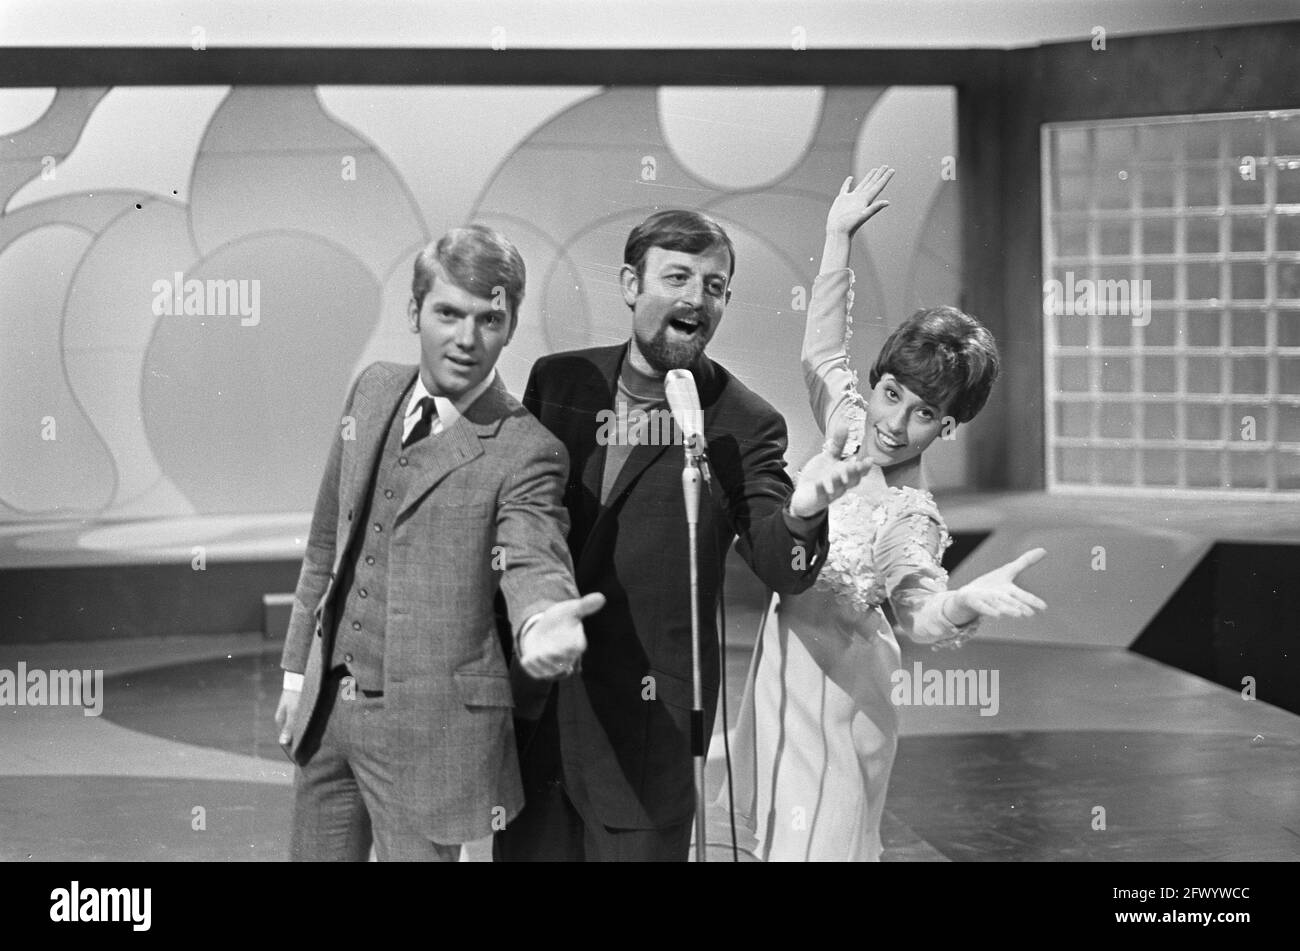 Ronnie Tober, Roger Whittaker, and Belgian singer Tonia (from left) sing, September 11, 1968, entertainment programs, singers, The Netherlands, 20th century press agency photo, news to remember, documentary, historic photography 1945-1990, visual stories, human history of the Twentieth Century, capturing moments in time Stock Photo